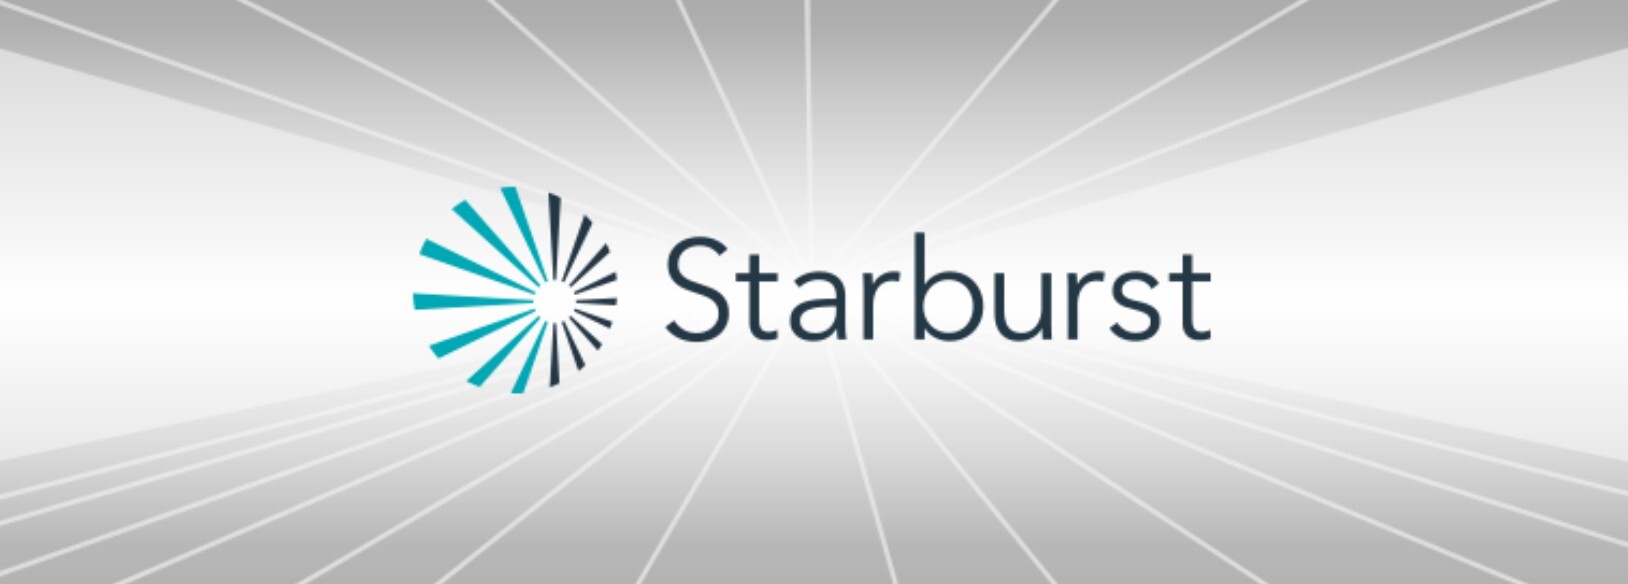 Starburst Data Archives - Software Engineering Daily